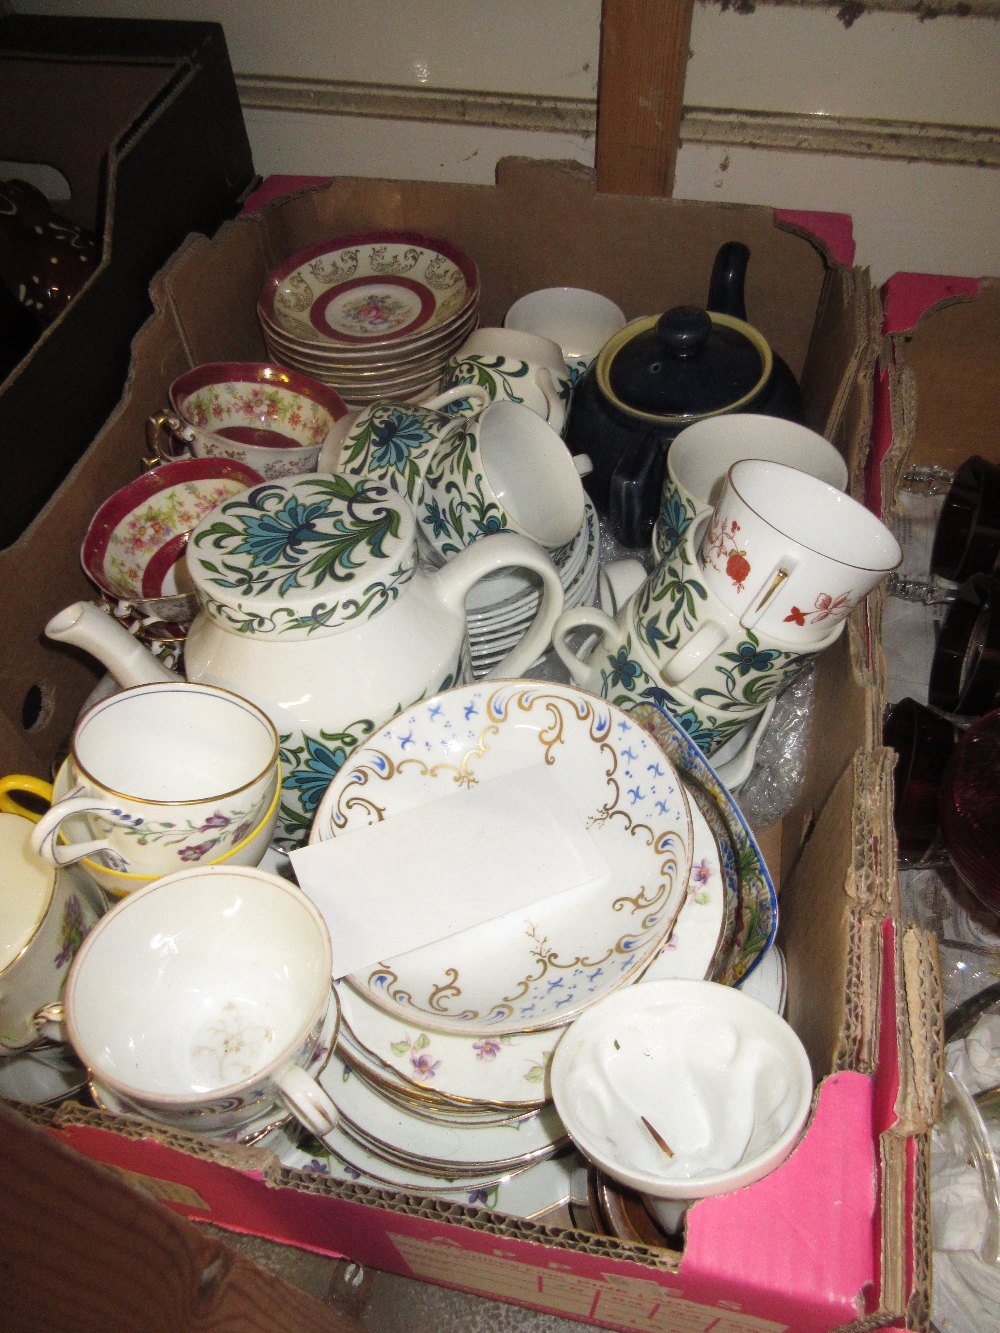 Midwinter pottery teaset, a Royal Albert part teaset and a quantity of various other tea ware